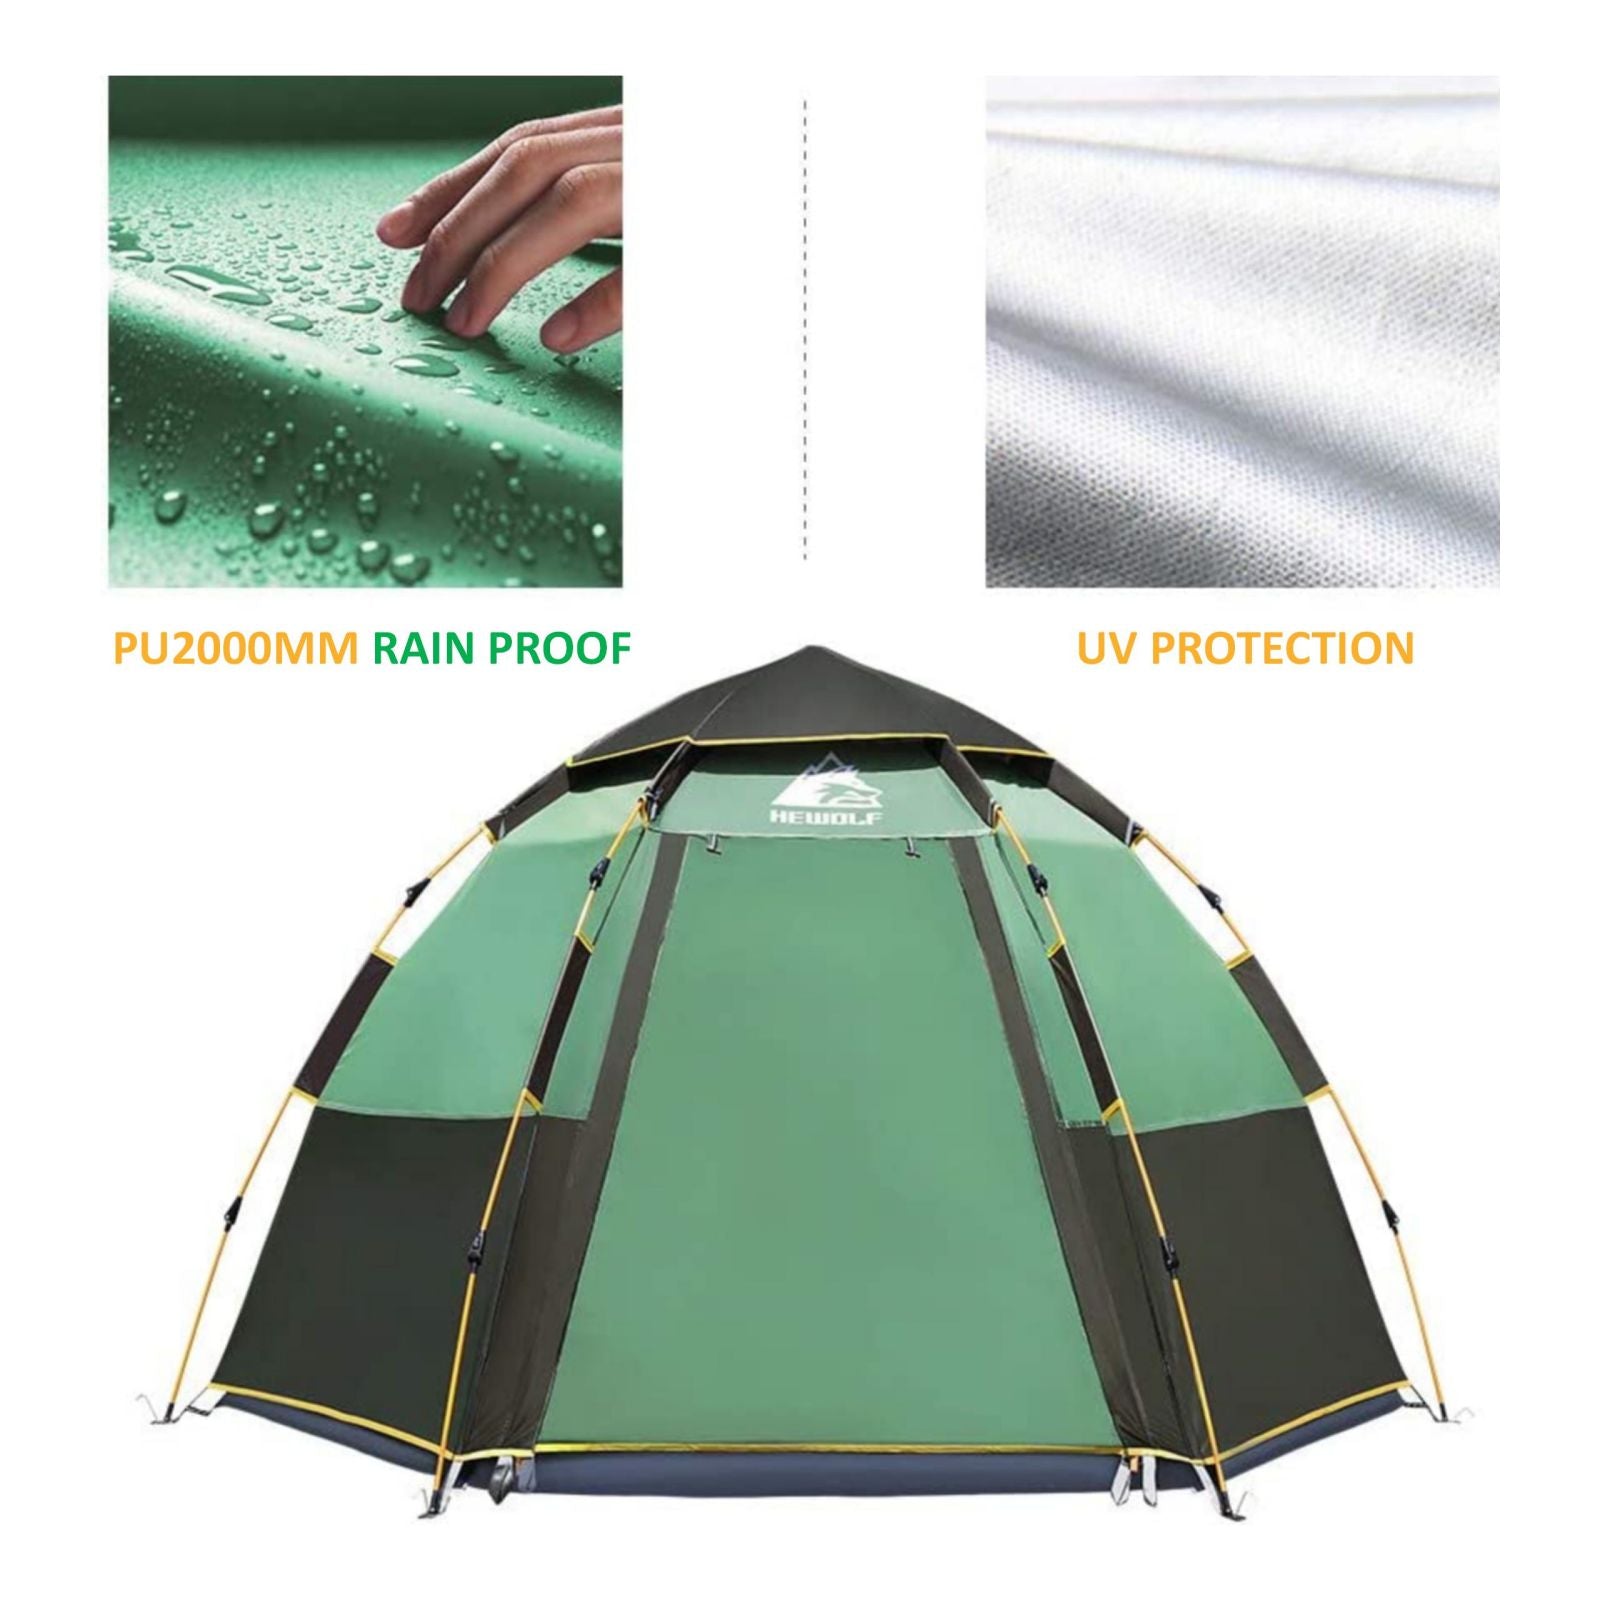 Waterproof Instant Camping Tent 4/5/6 Person Easy Quick Setup Dome Hexagonal Family Tents for Camping, Double Layer Flysheet Can be Used as Beach Shelter